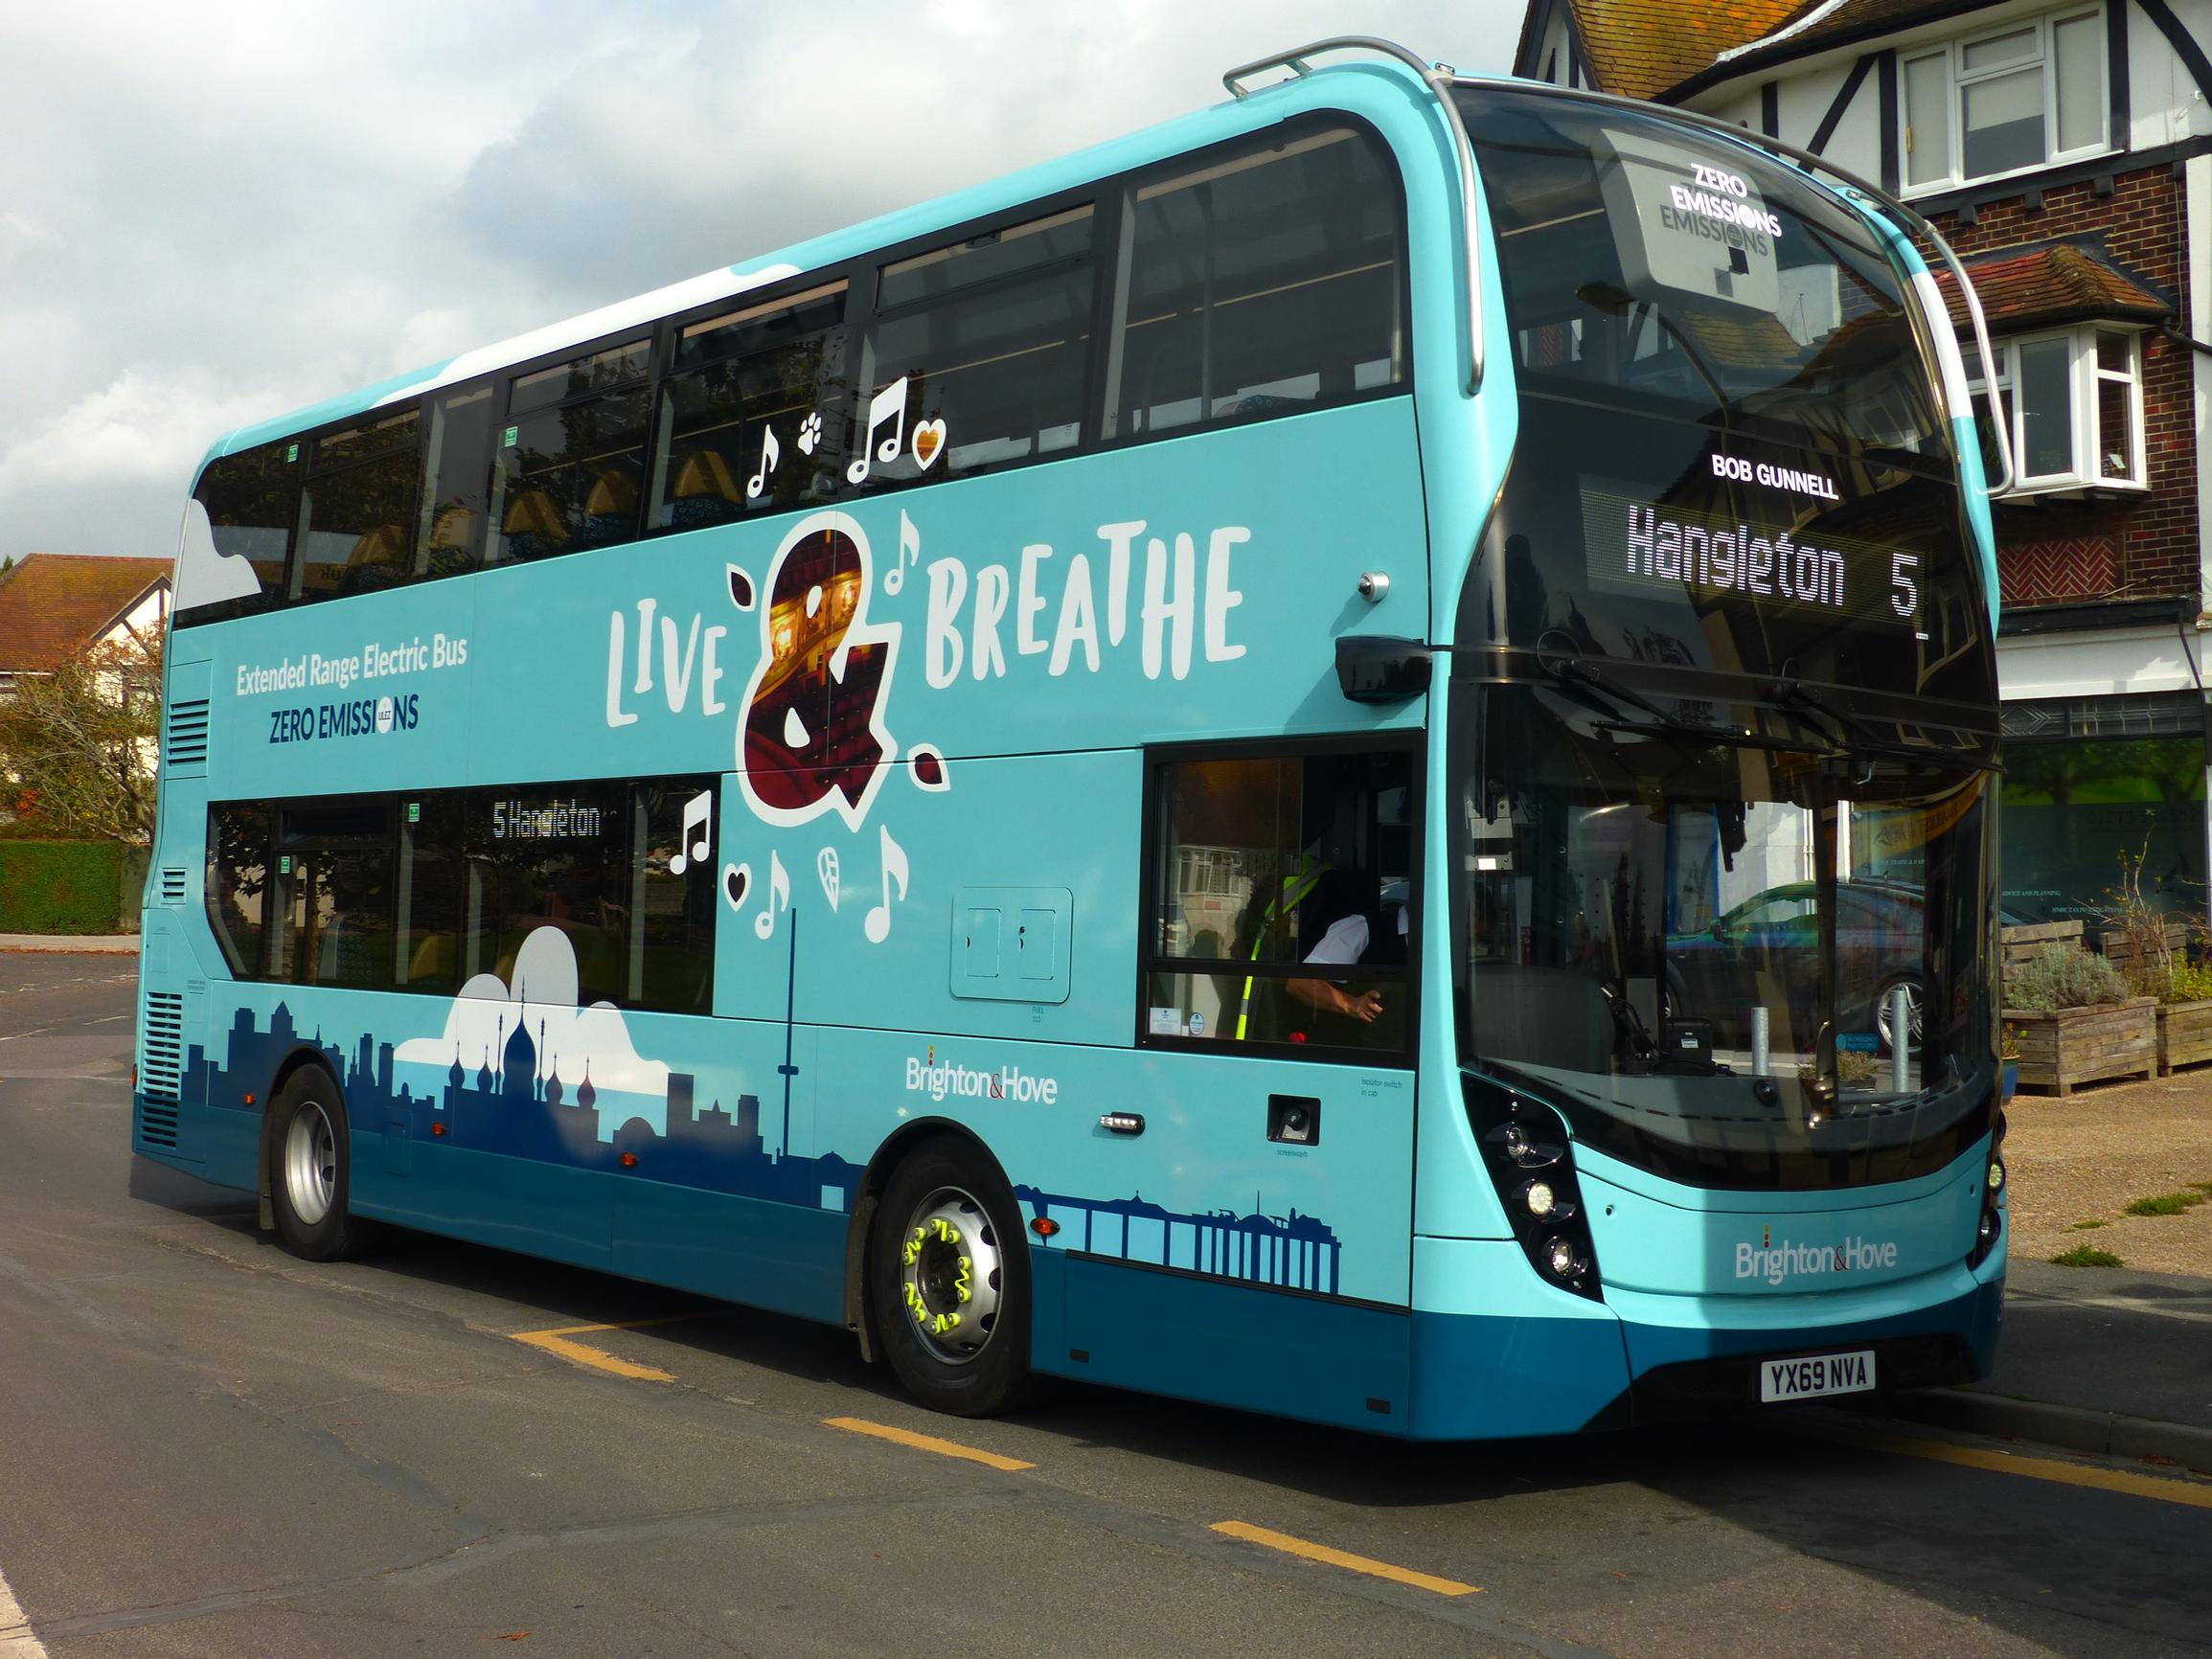 Hybrid buses have an important long-term role, says the CPT